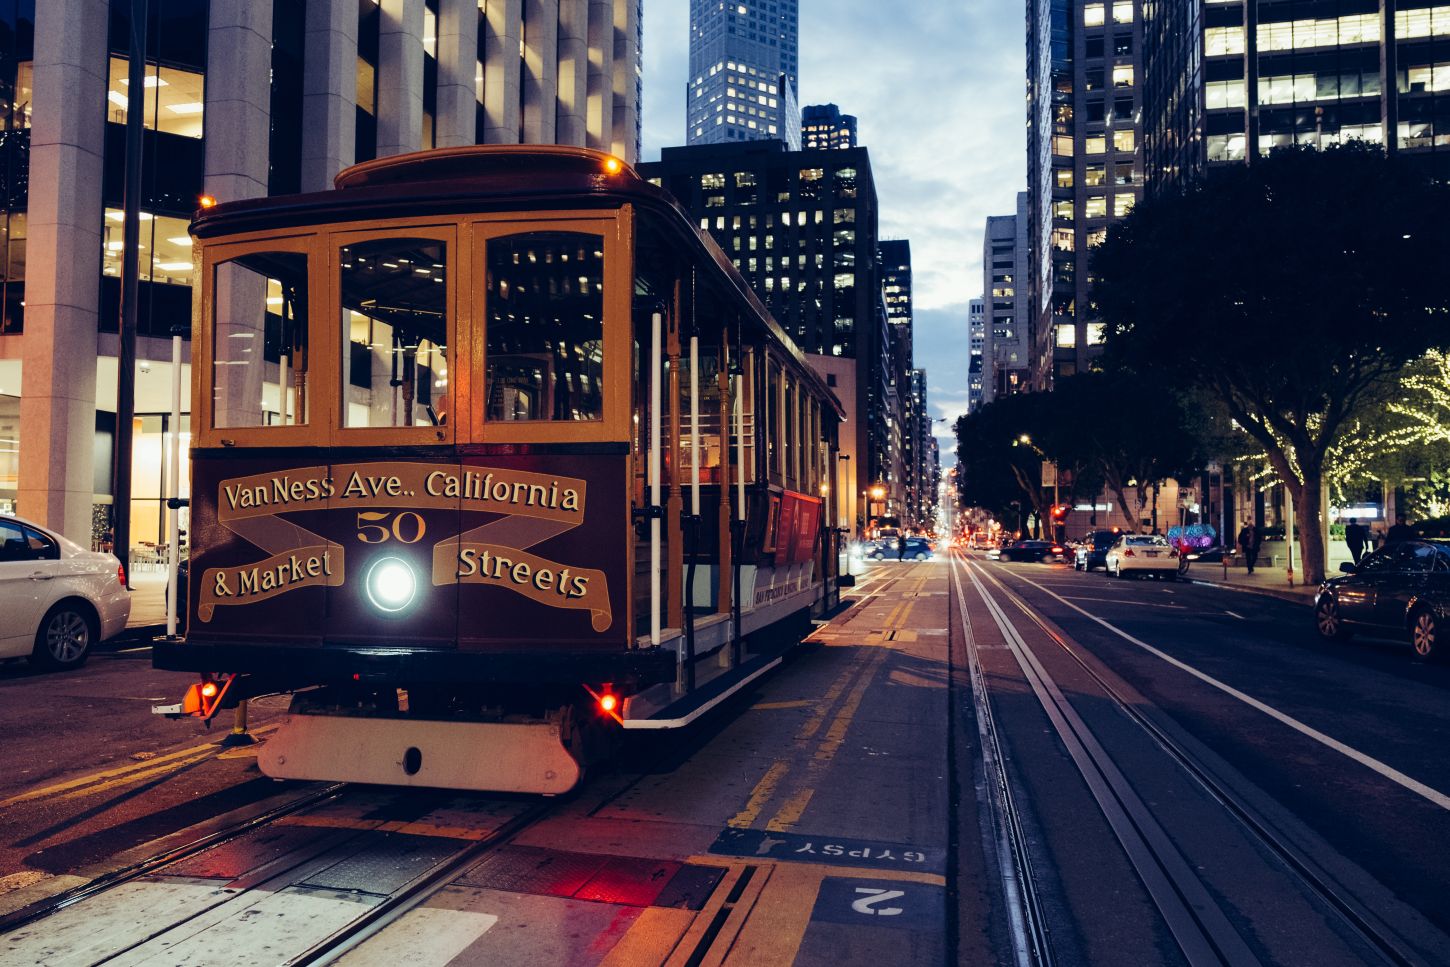 Historie trifft Moderne: die Cable Cars in San Francisco